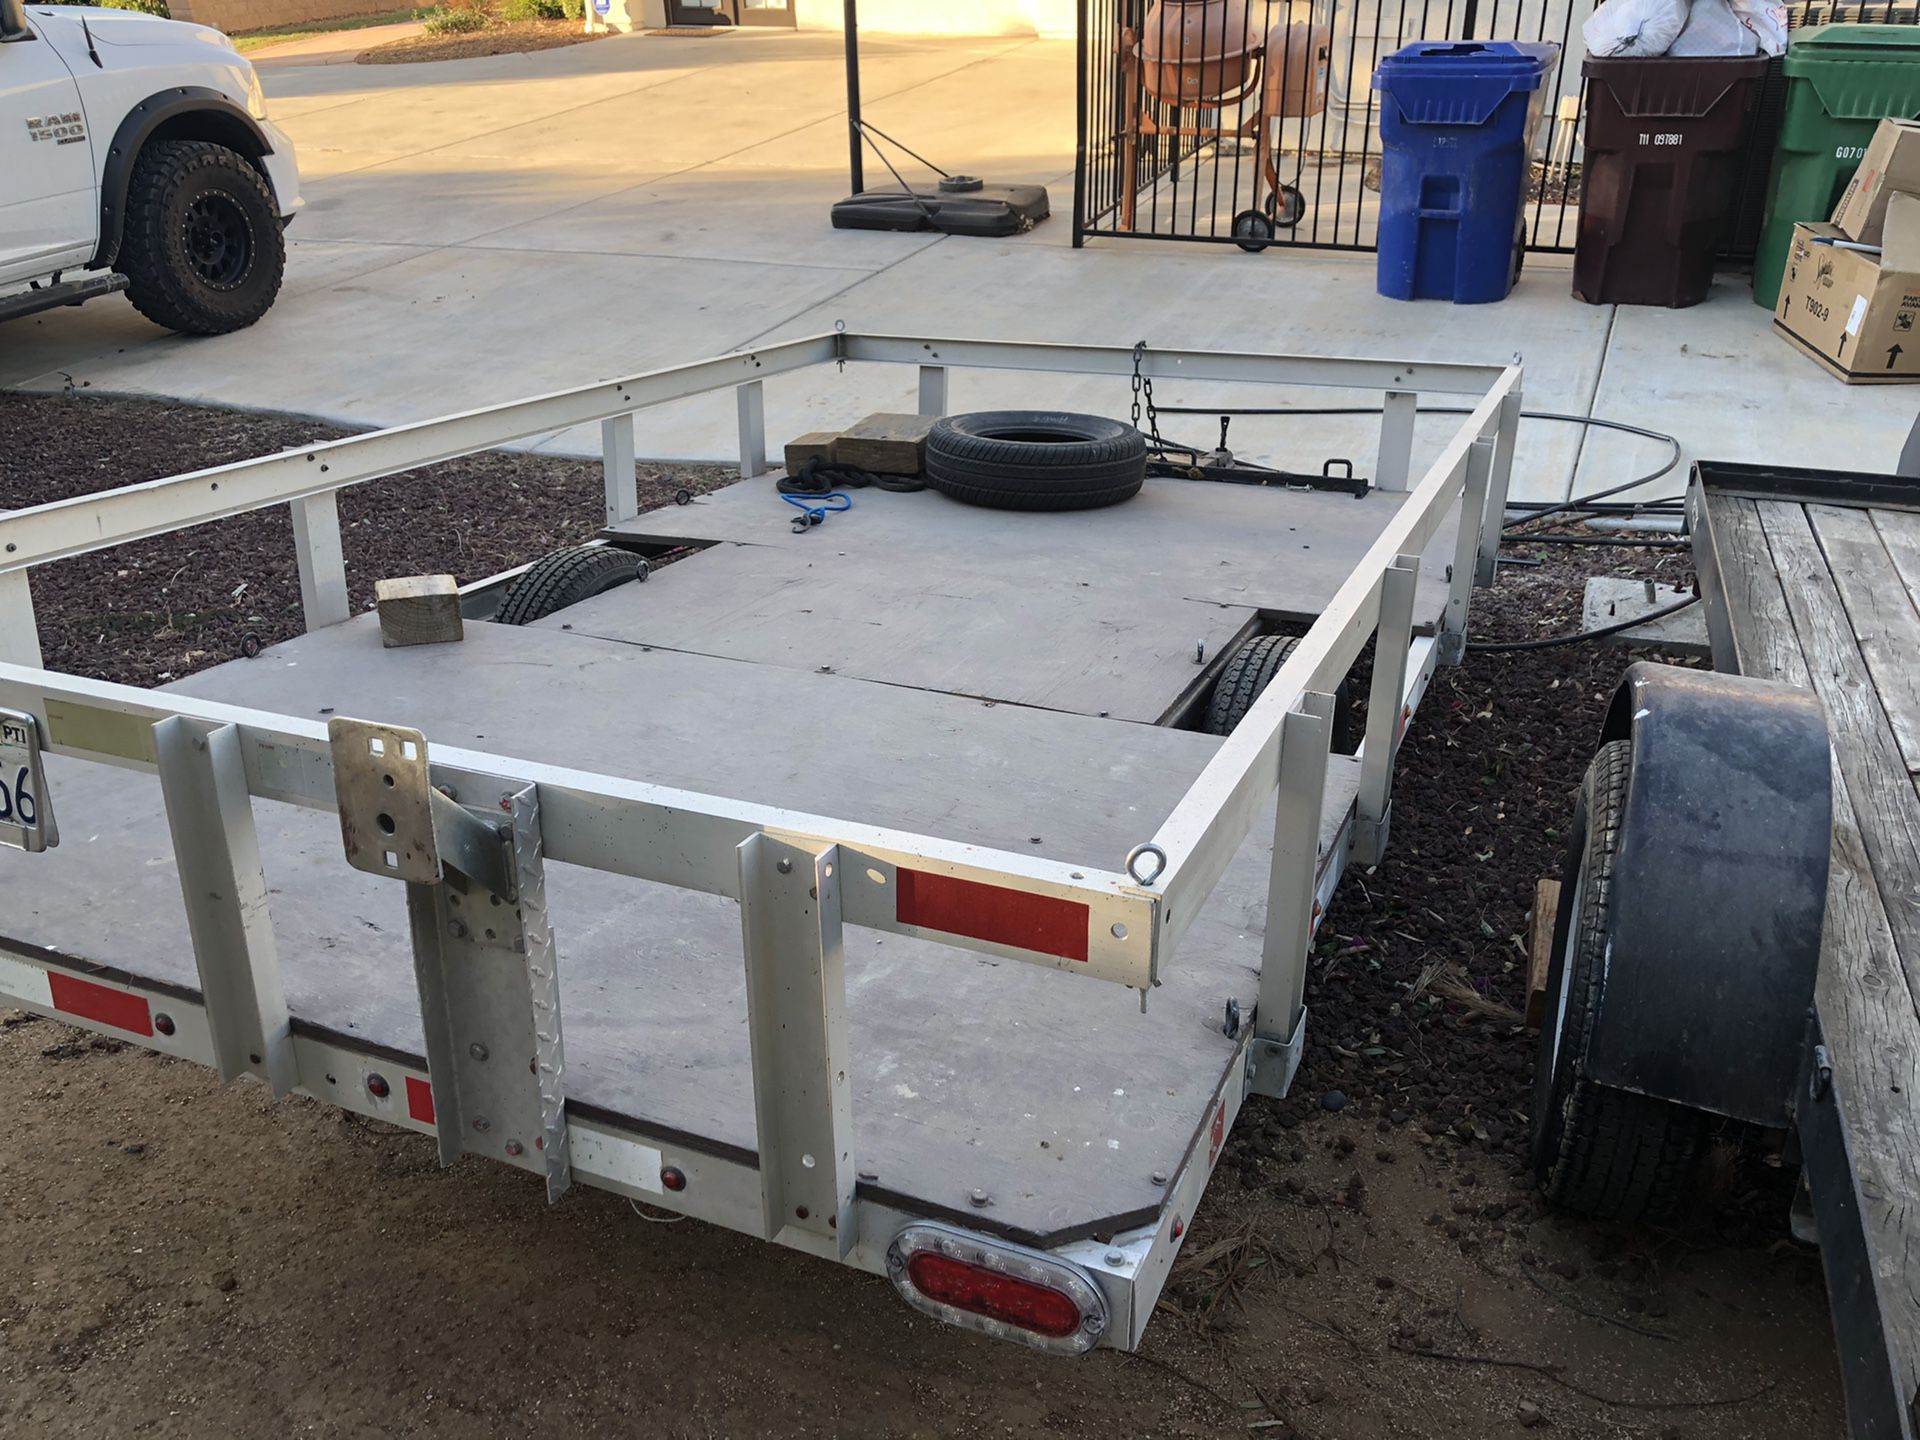 Aluminum Trailer 10.5x6.5’ (with spare tire) New Tires Mounted